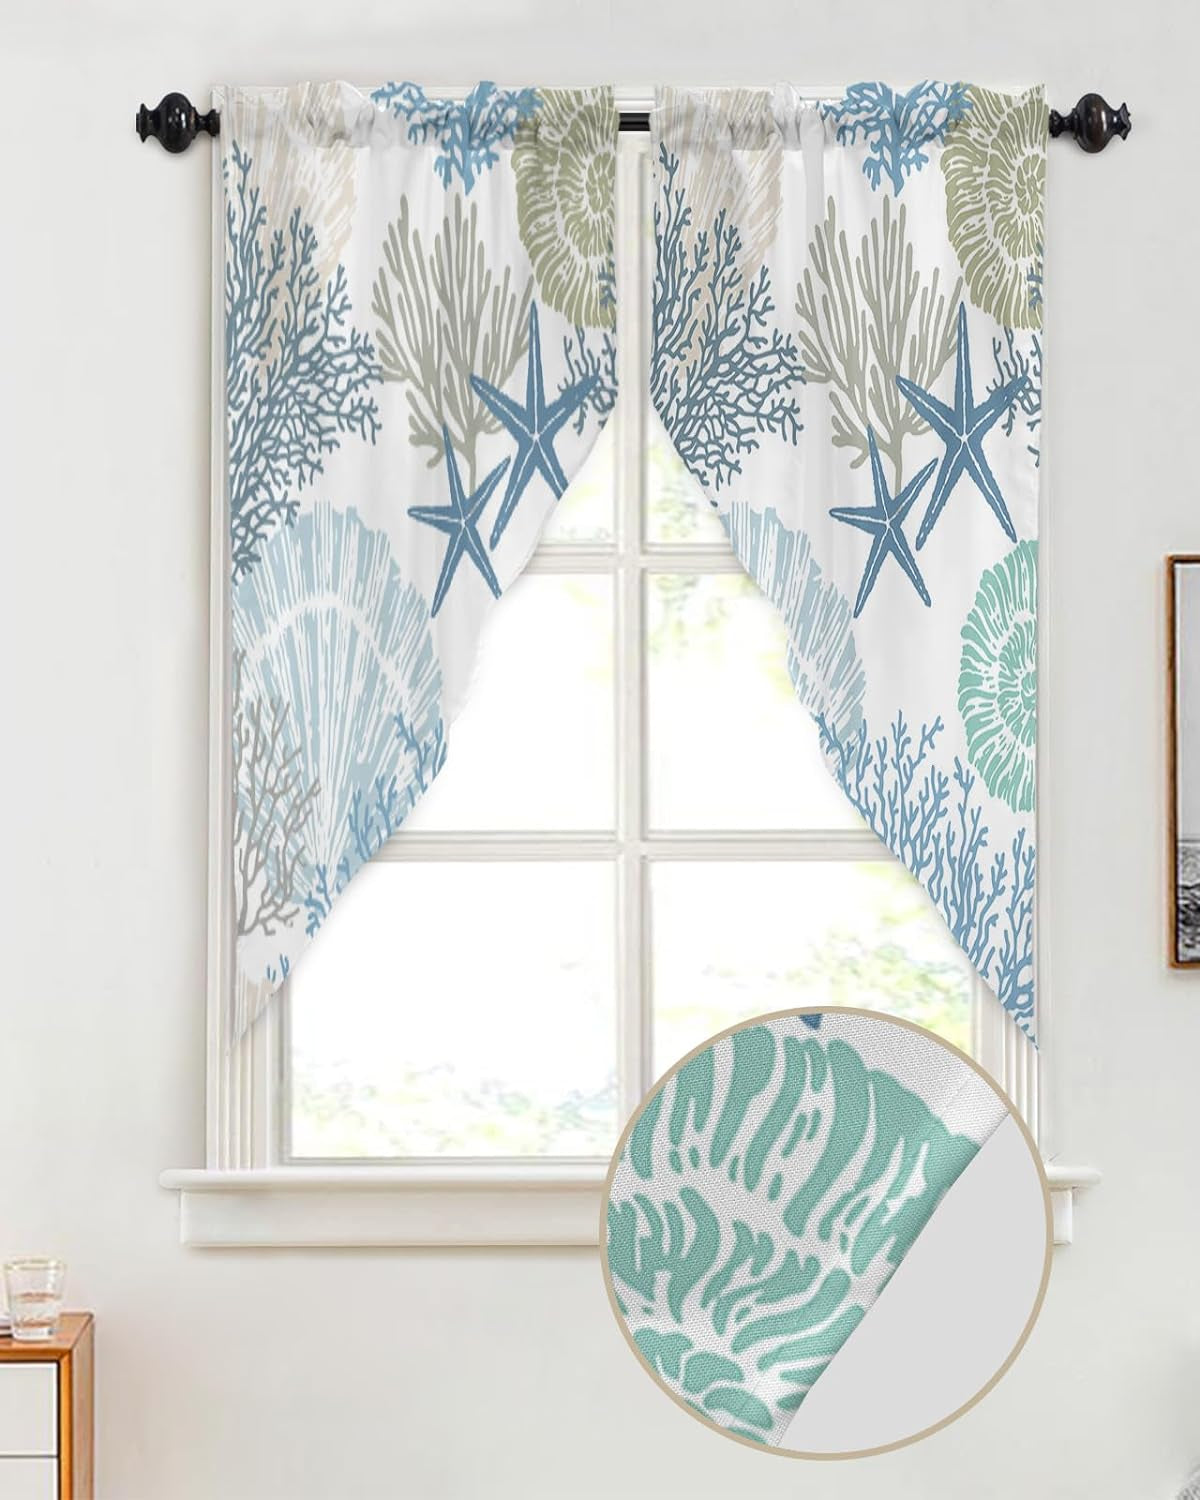 Swag Curtain,Ocean Theme Coral Shell Starfish Kitchen Valances Rod Pocket Curtains Tier Pair Swag Topper,Teal Blue Marine Sealife 2 Panels Window Treatment for Bathroom Living Room Bedroom